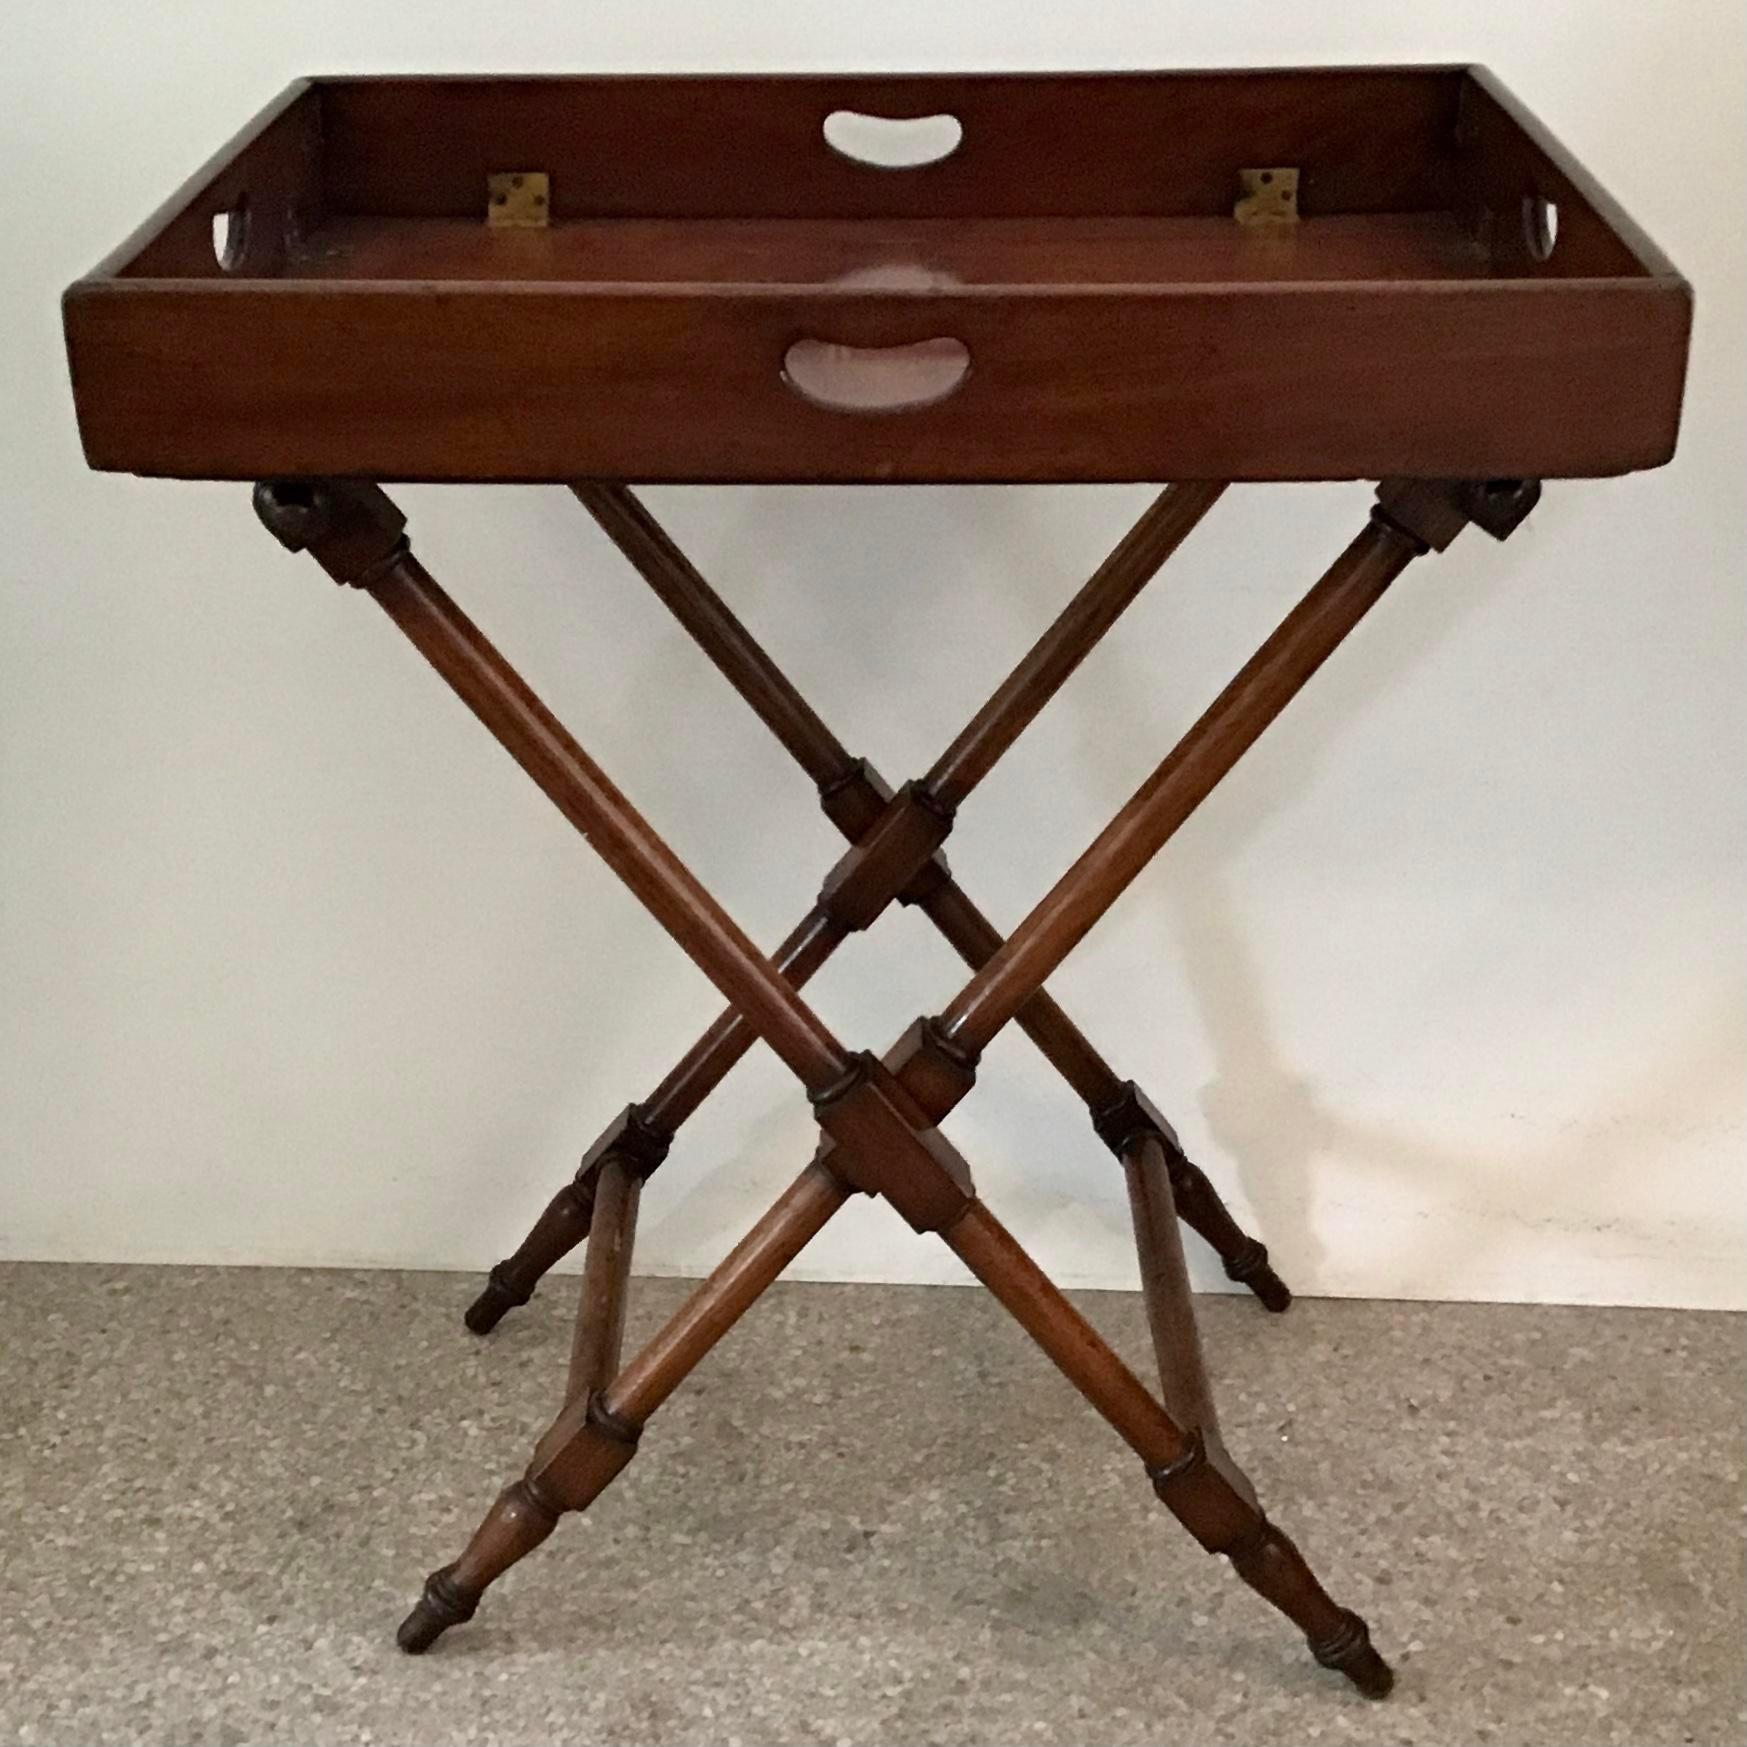 Beautiful English and elegant design wood serving tray table. Folding base for easy storage. Would be a great addition to your bar or studio.